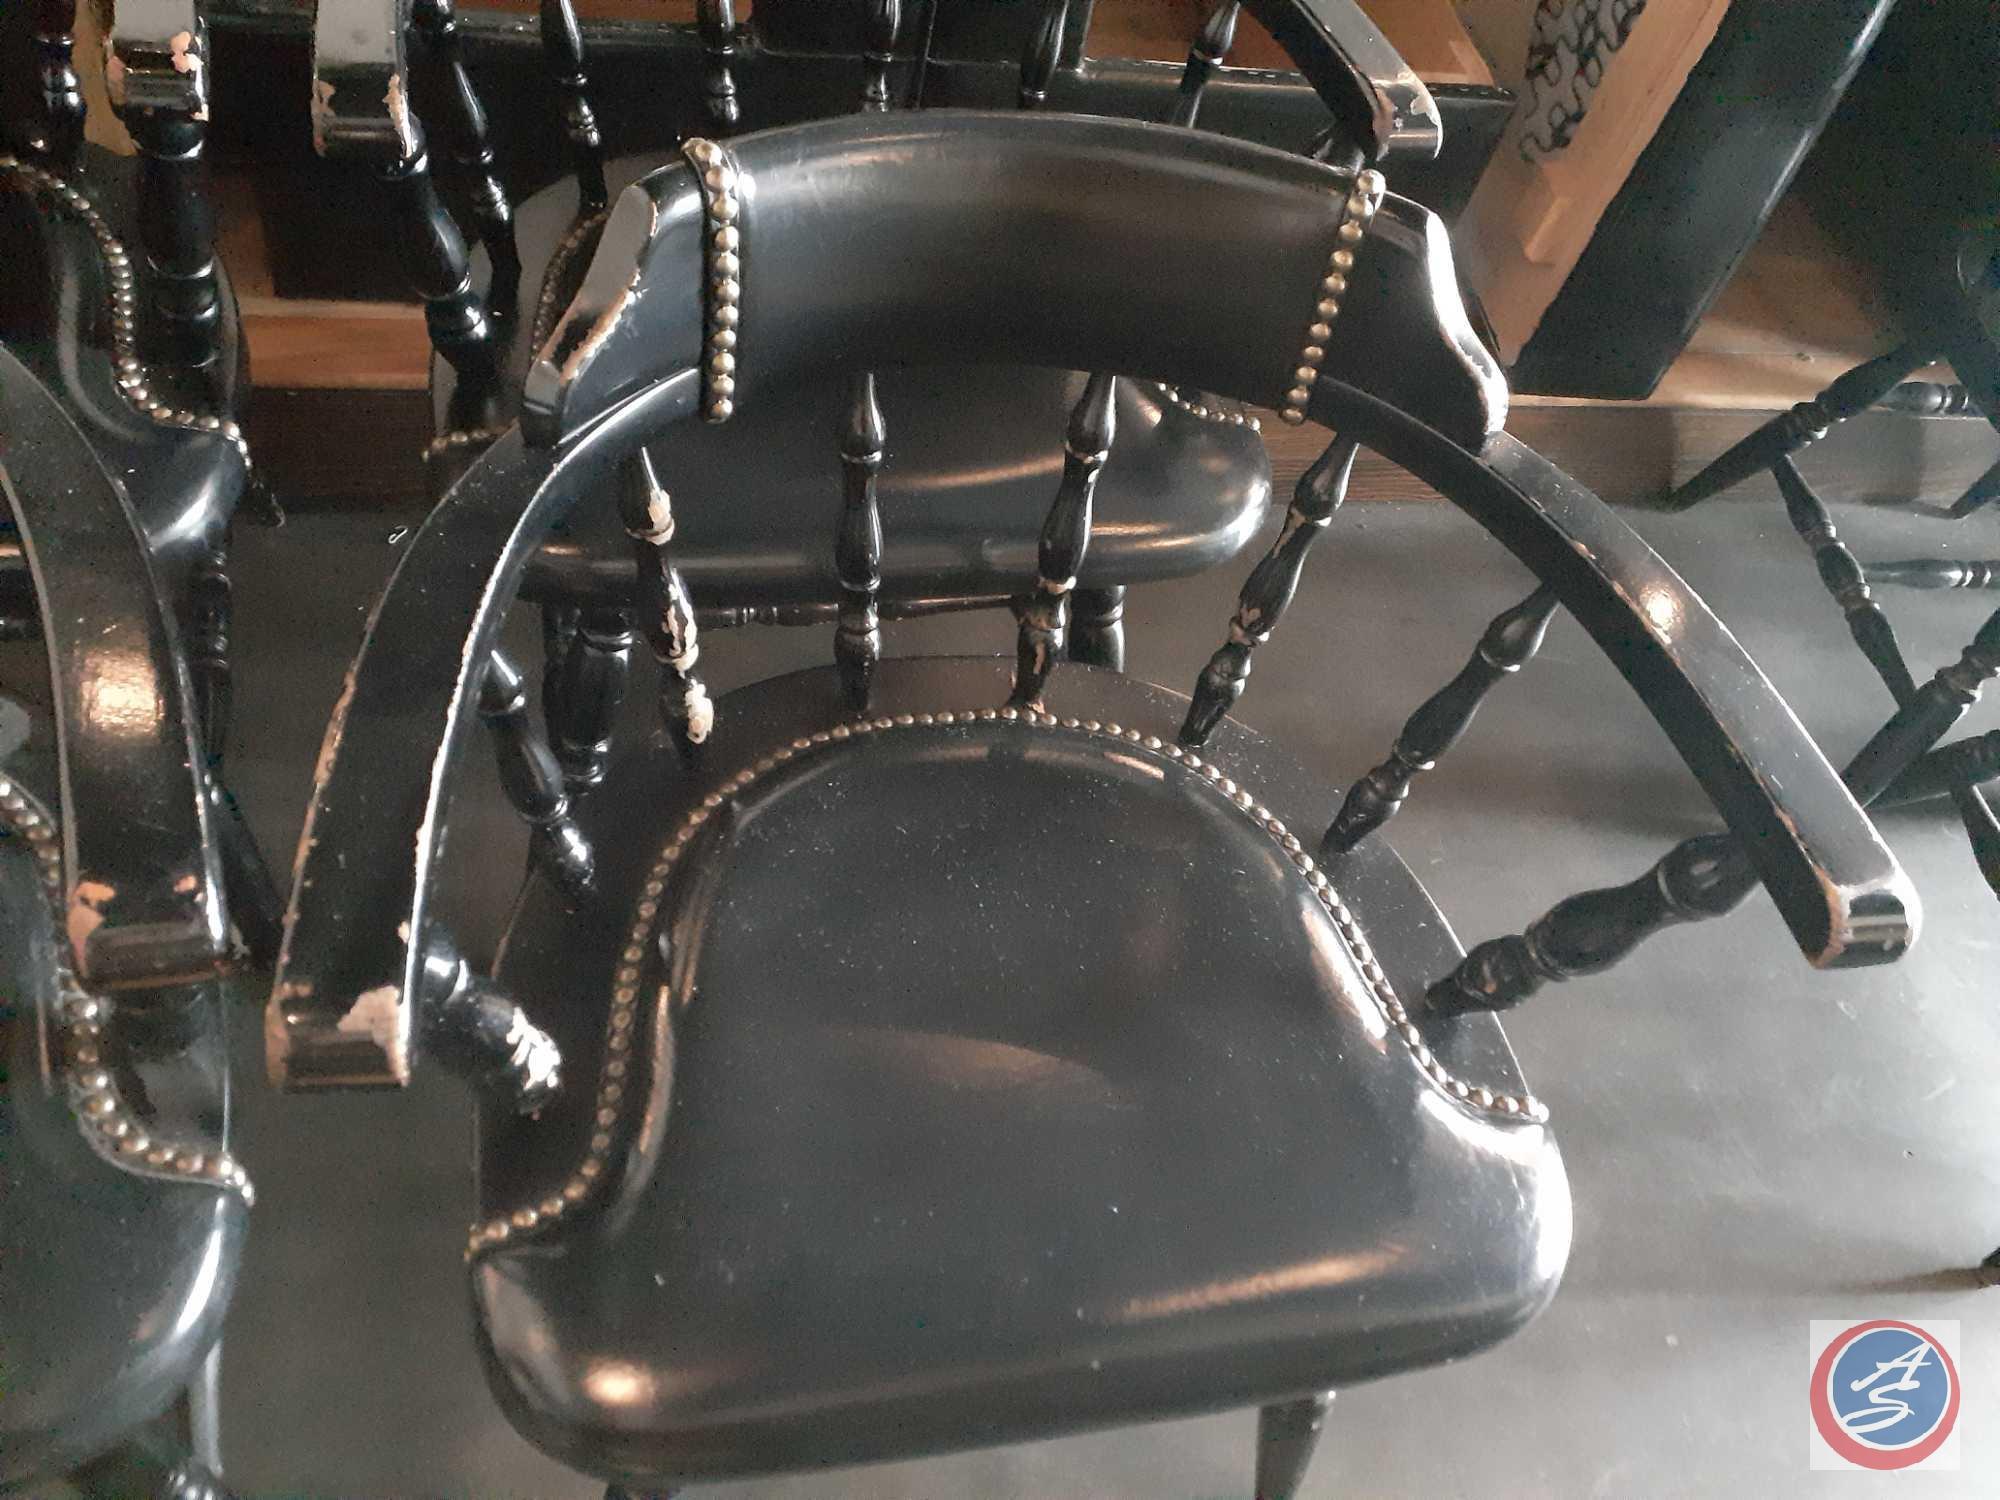 {{4X$BID}} (4) Spindle Back Dining Chairs w/ Nailhead Accents